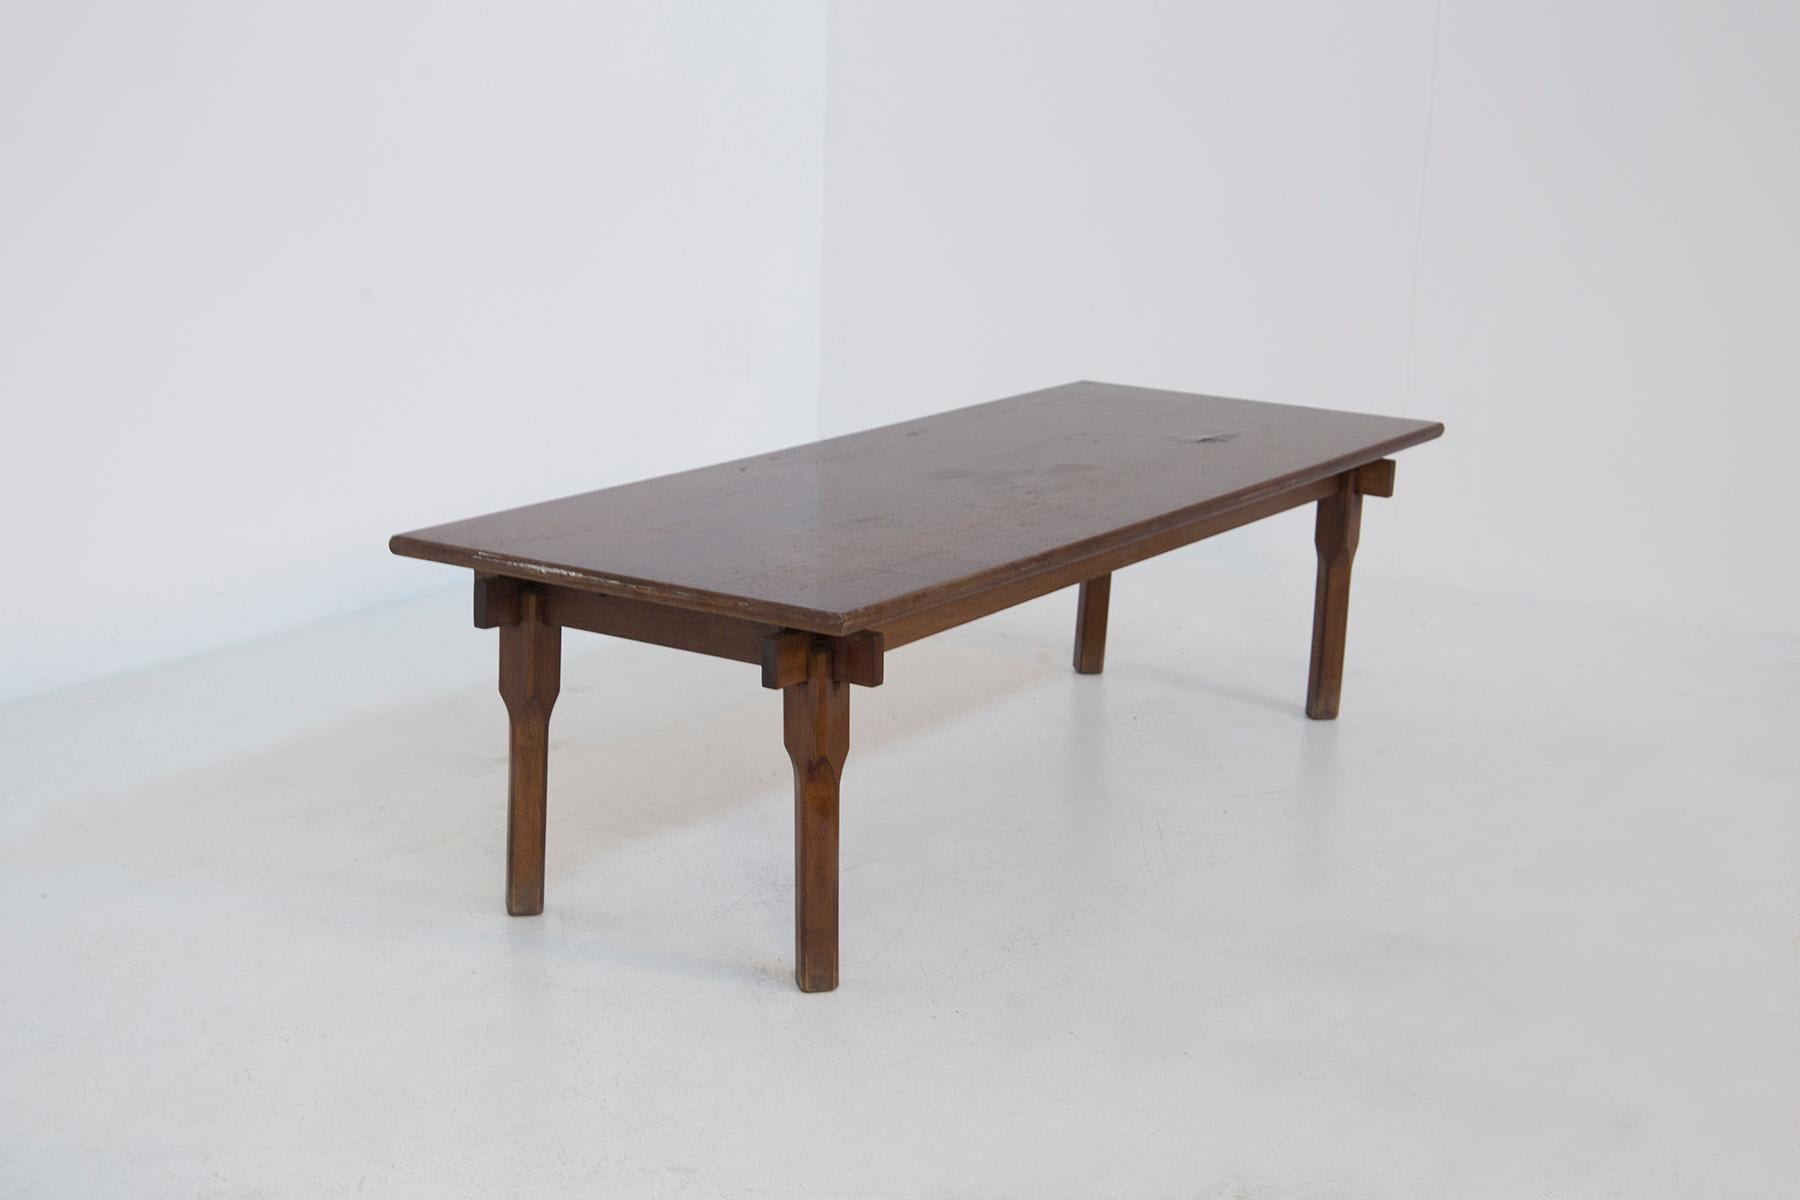 Beautiful and large coffee table designed by Gianfranco Frattini entirely in dark walnut wood.
It is characterized by its particular woodworking, especially for the joints at the base of the table top with the feet, typical of Frattini.
The table